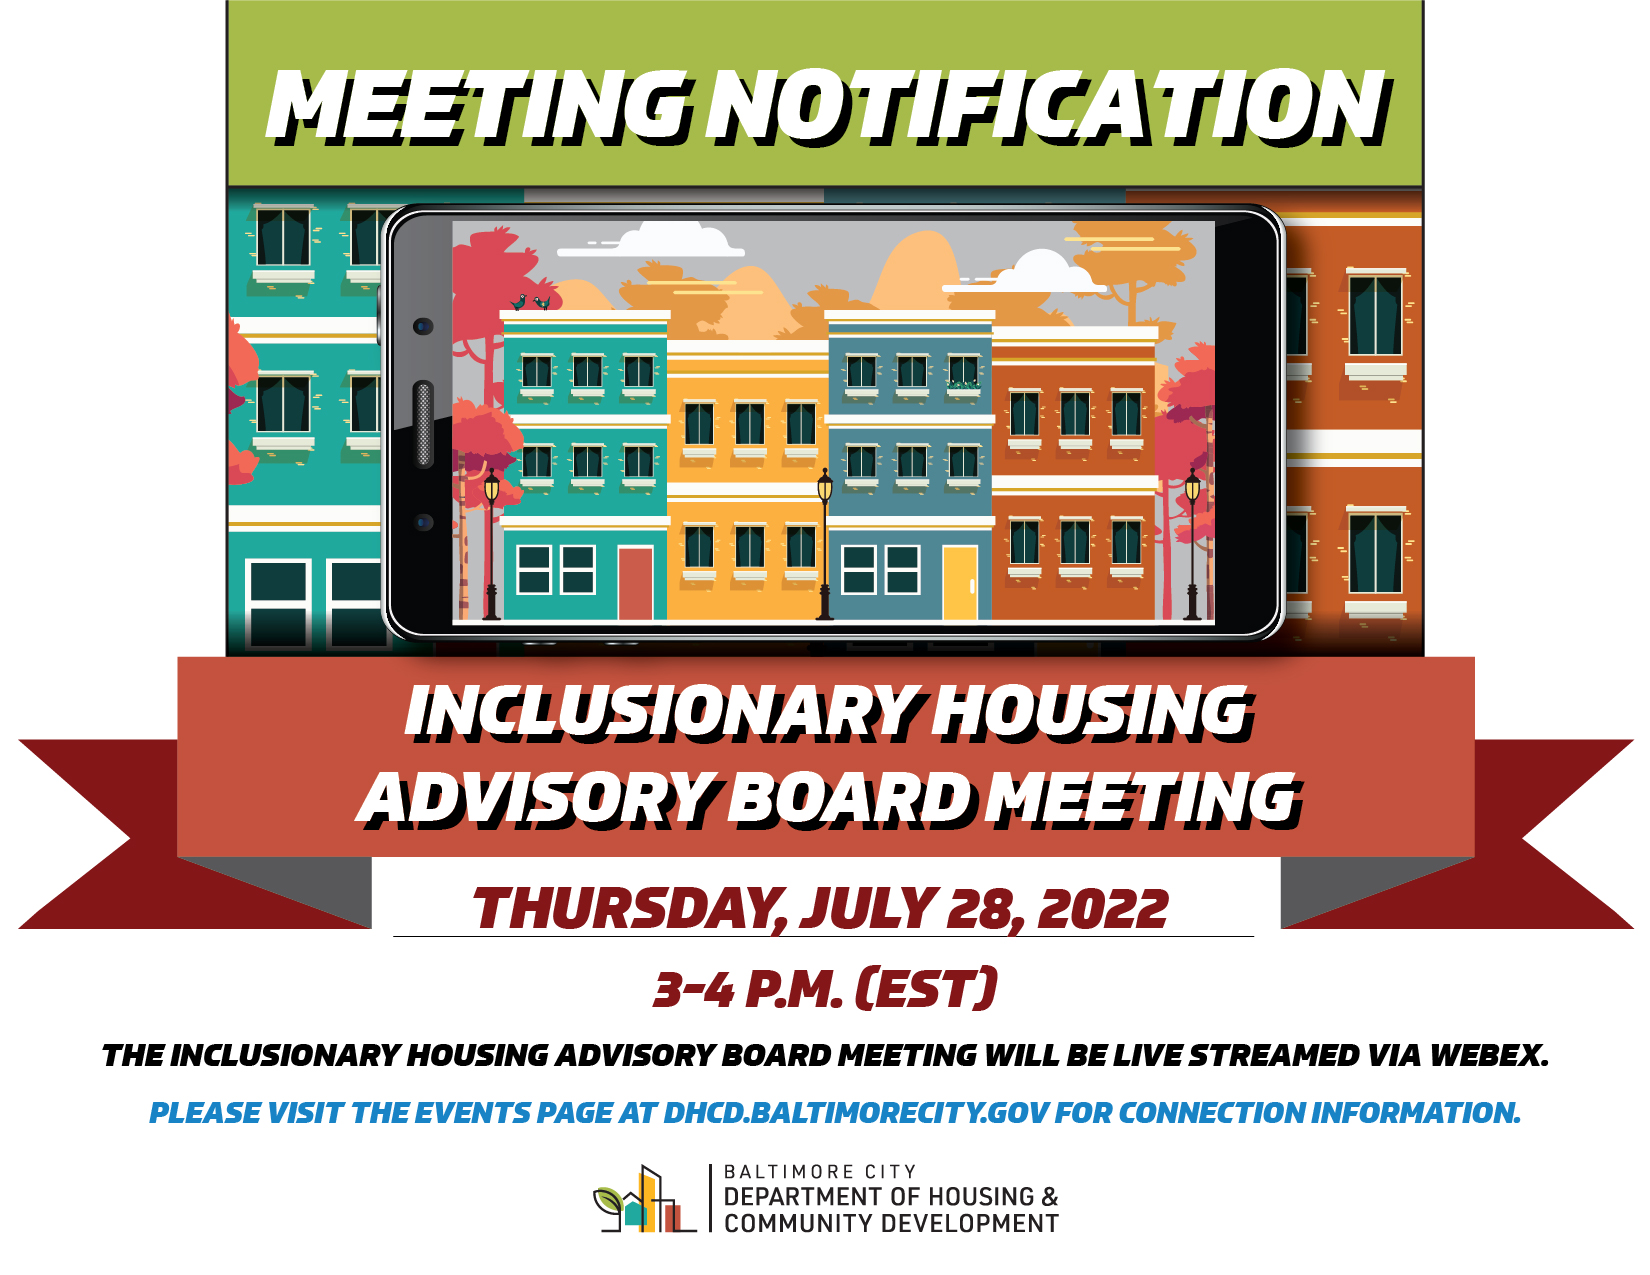 Inclusionary Housing Advisory Board Meeting Notice